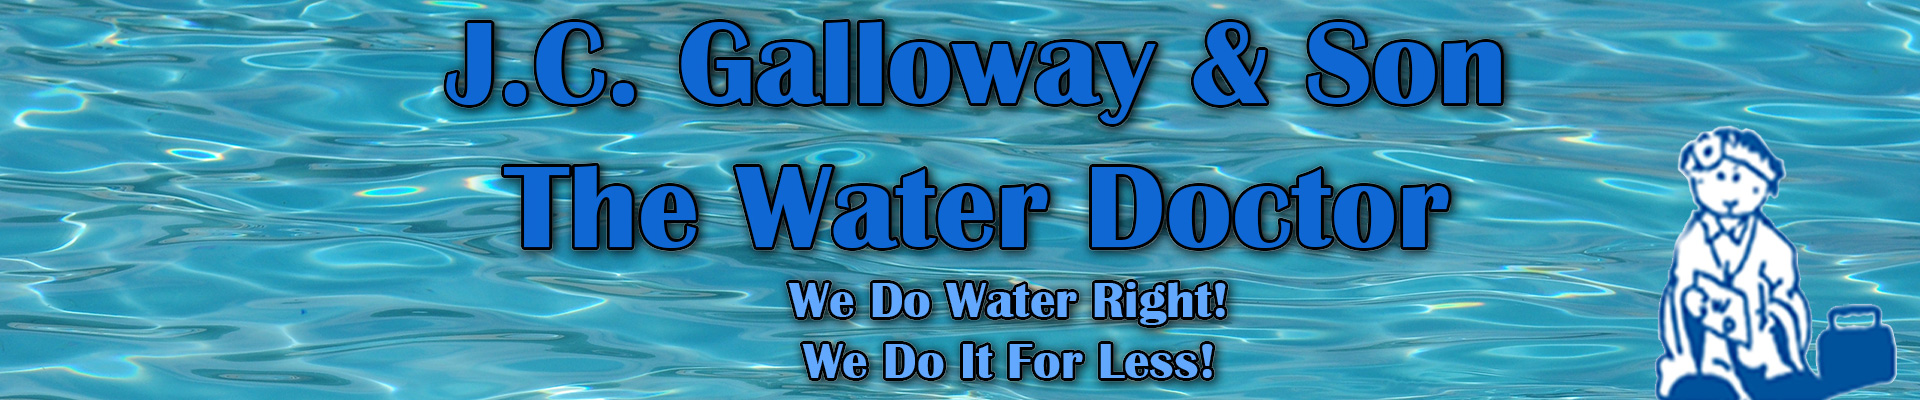 J.C. Galloway & Son The Water Doctor